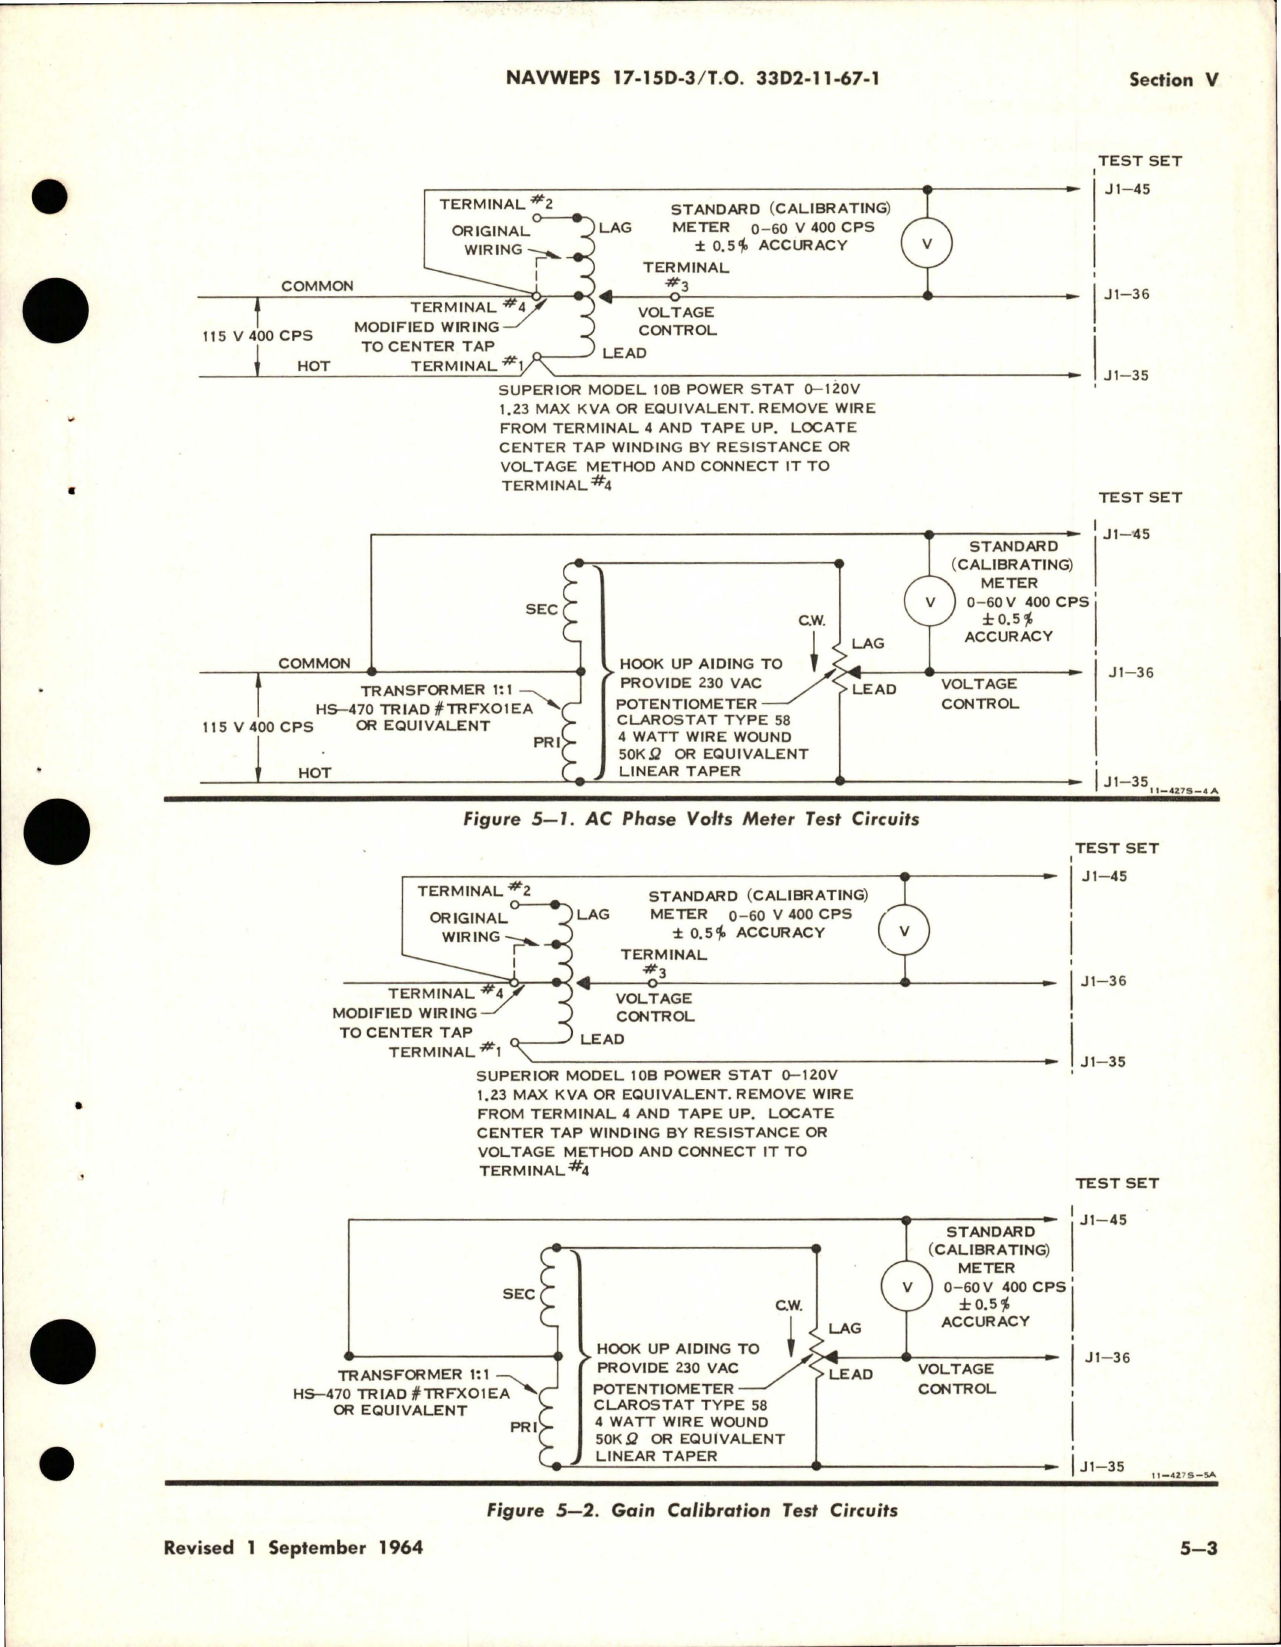 Sample page 7 from AirCorps Library document: Operation, Service Instructions with Illustrated Parts Breakdown for Synchrophaser Test Set - Part GS4150